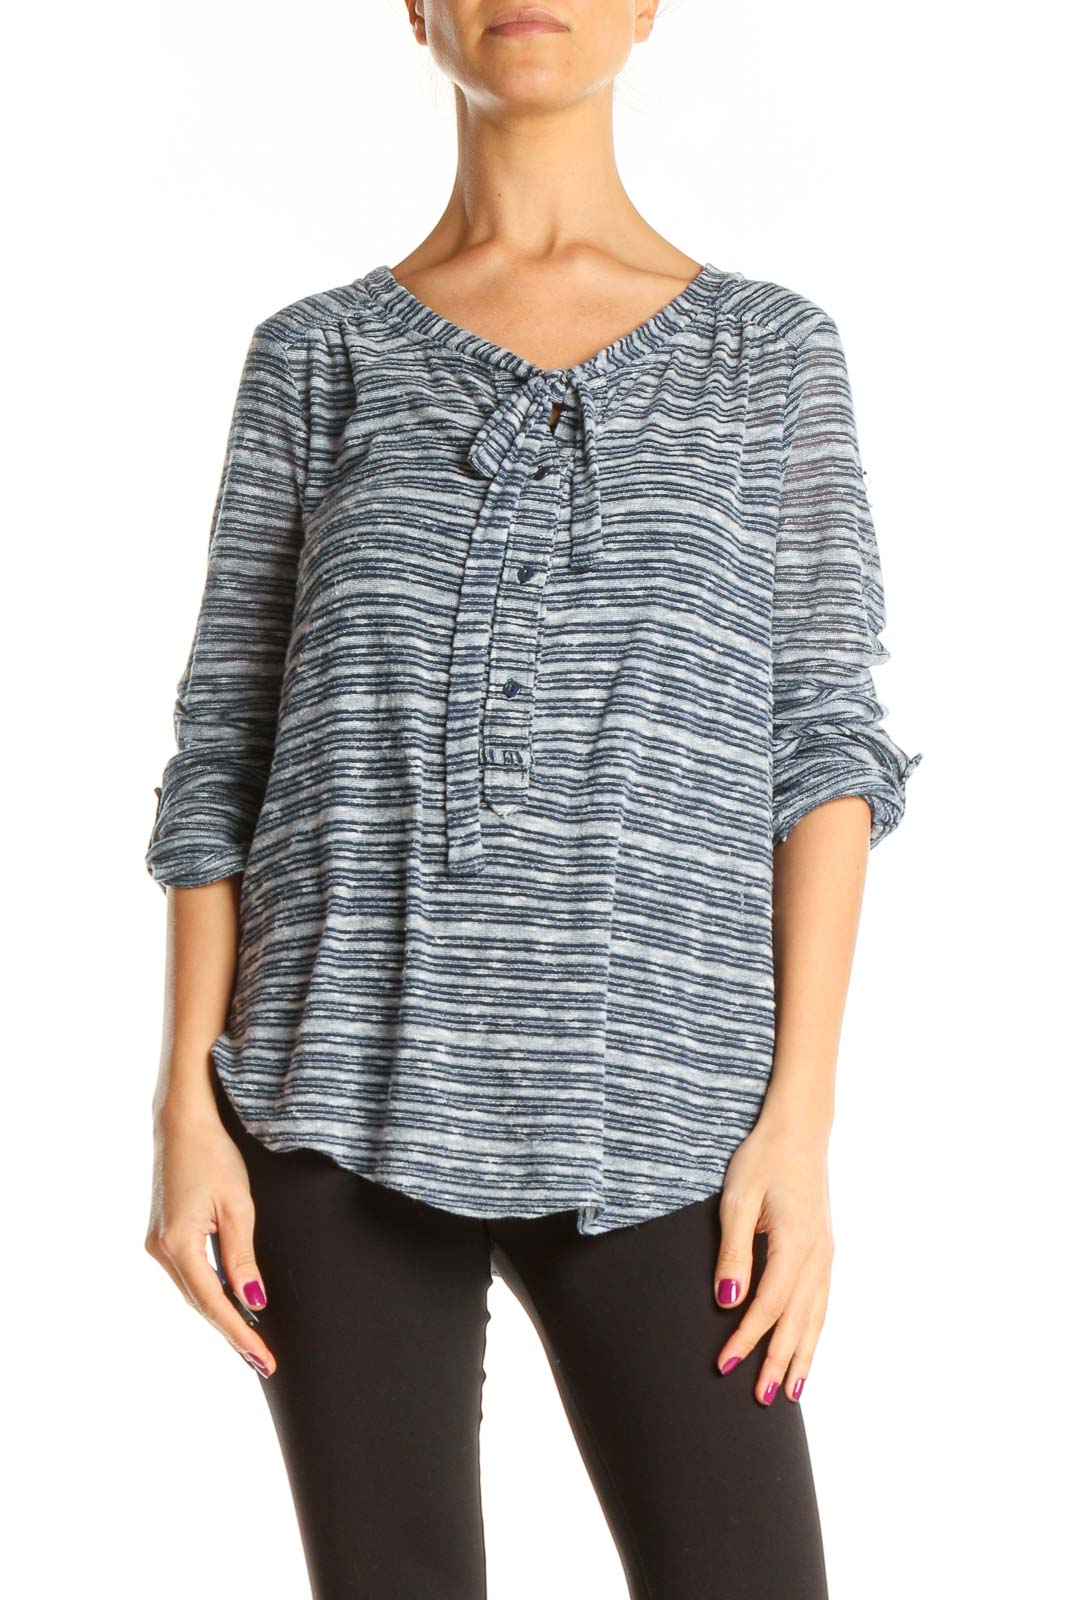 Gray Striped Casual Top Front